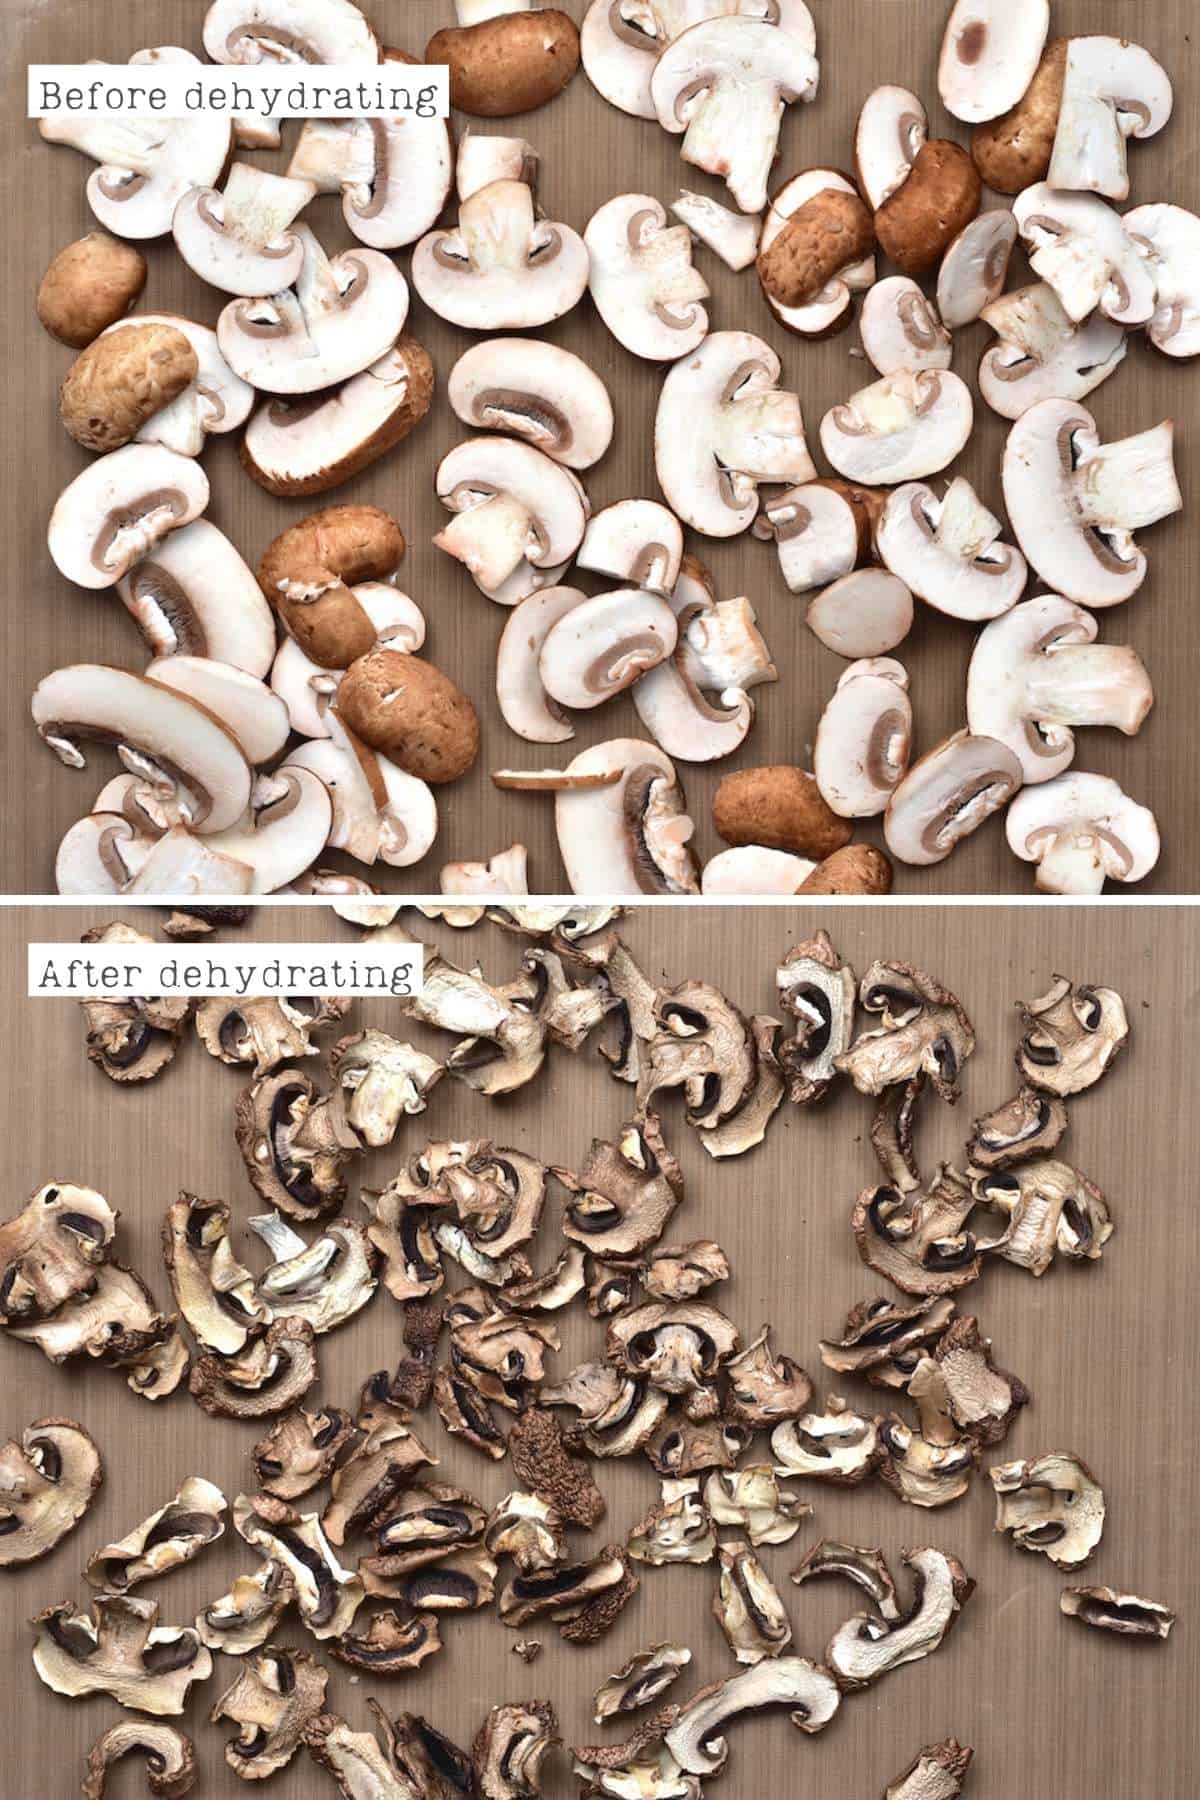 How to Dry Mushrooms in the Oven, Dehydrator, or Naturally - Utopia